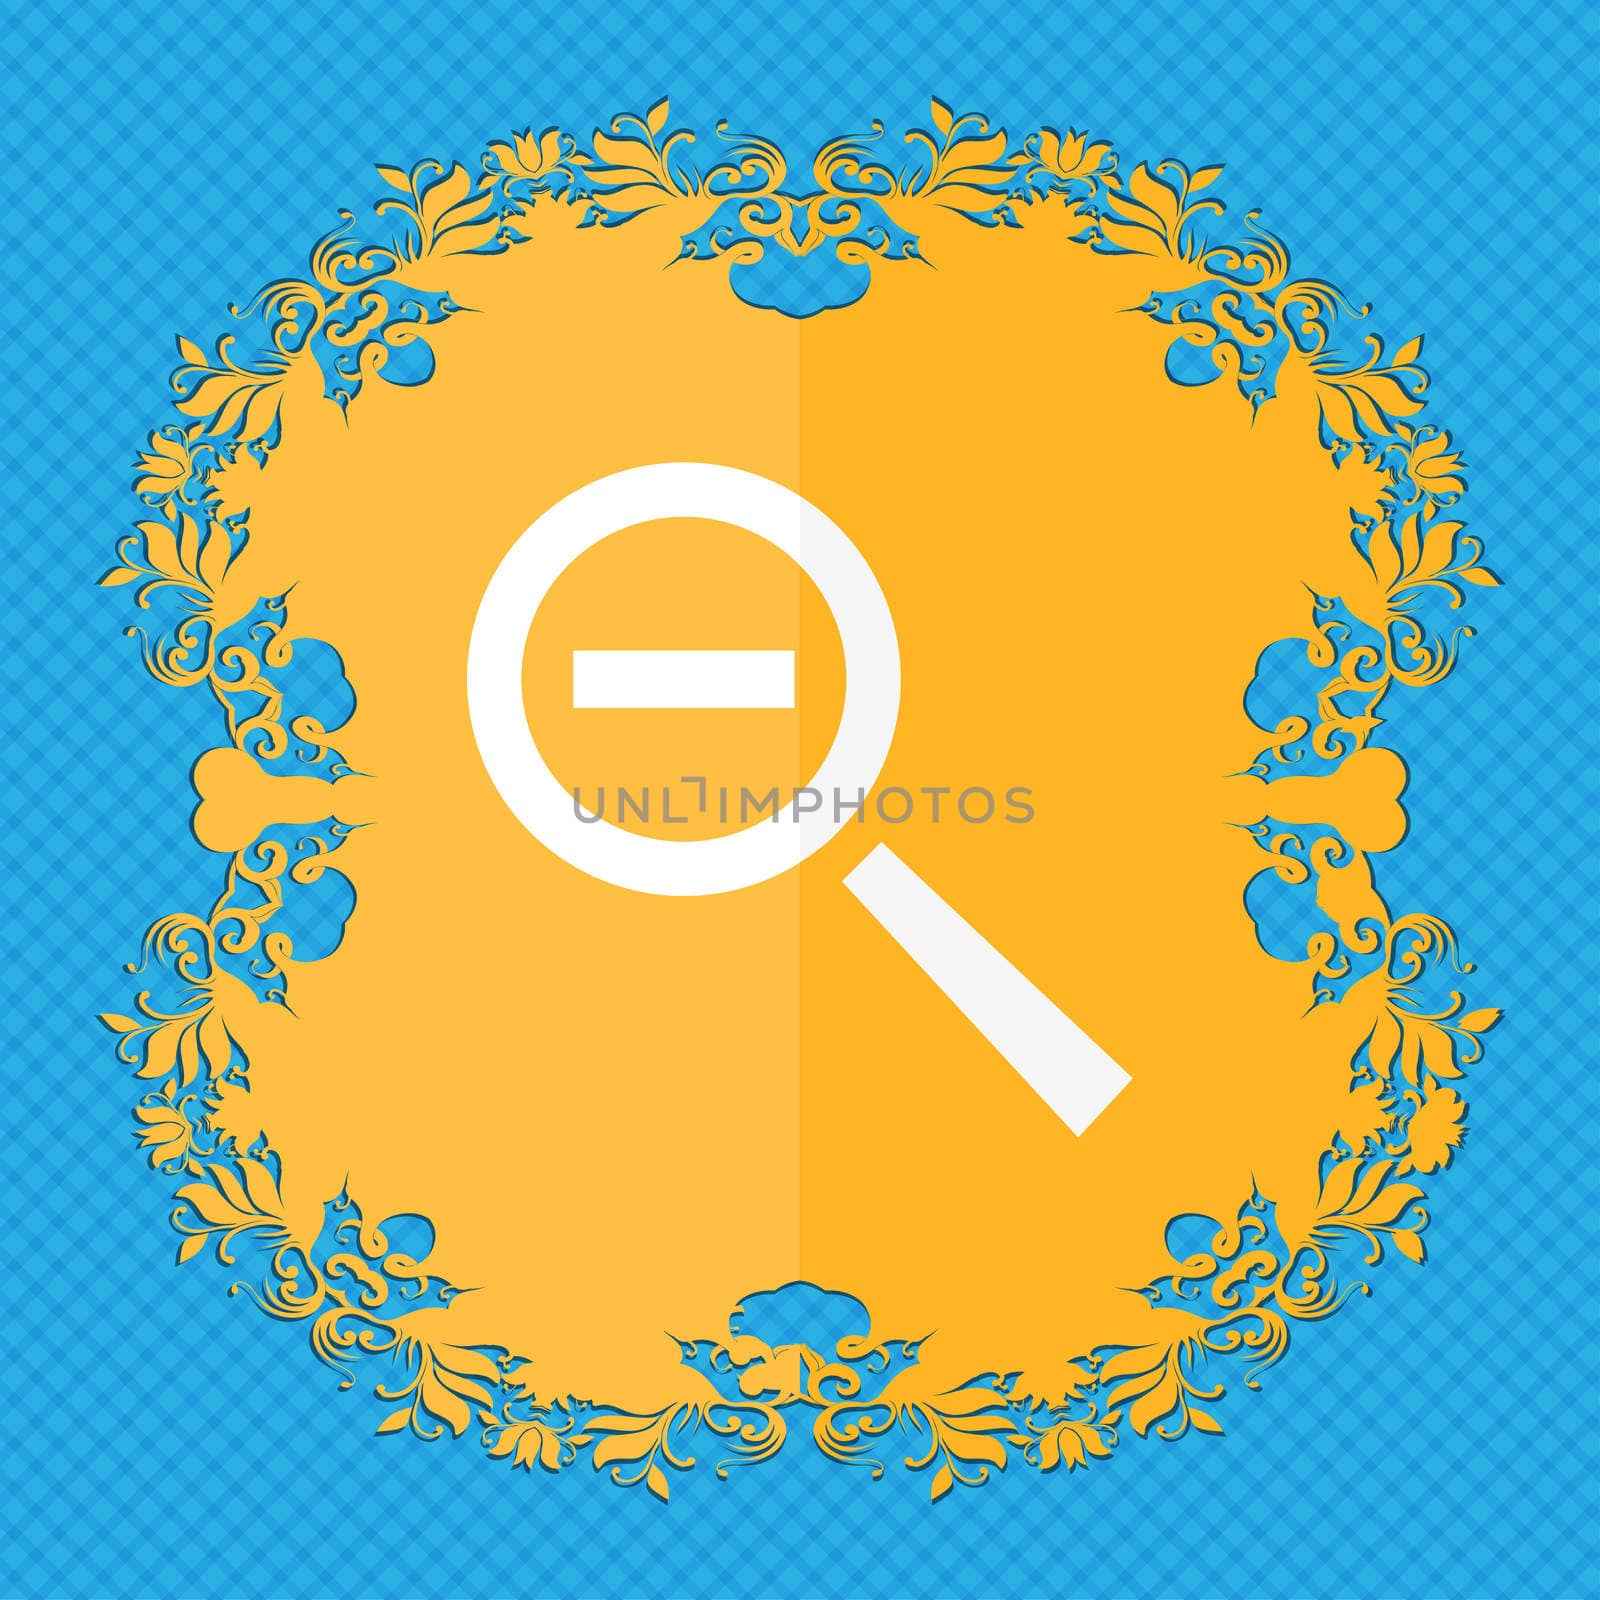 Magnifier glass, Zoom tool icon sign. Floral flat design on a blue abstract background with place for your text. illustration